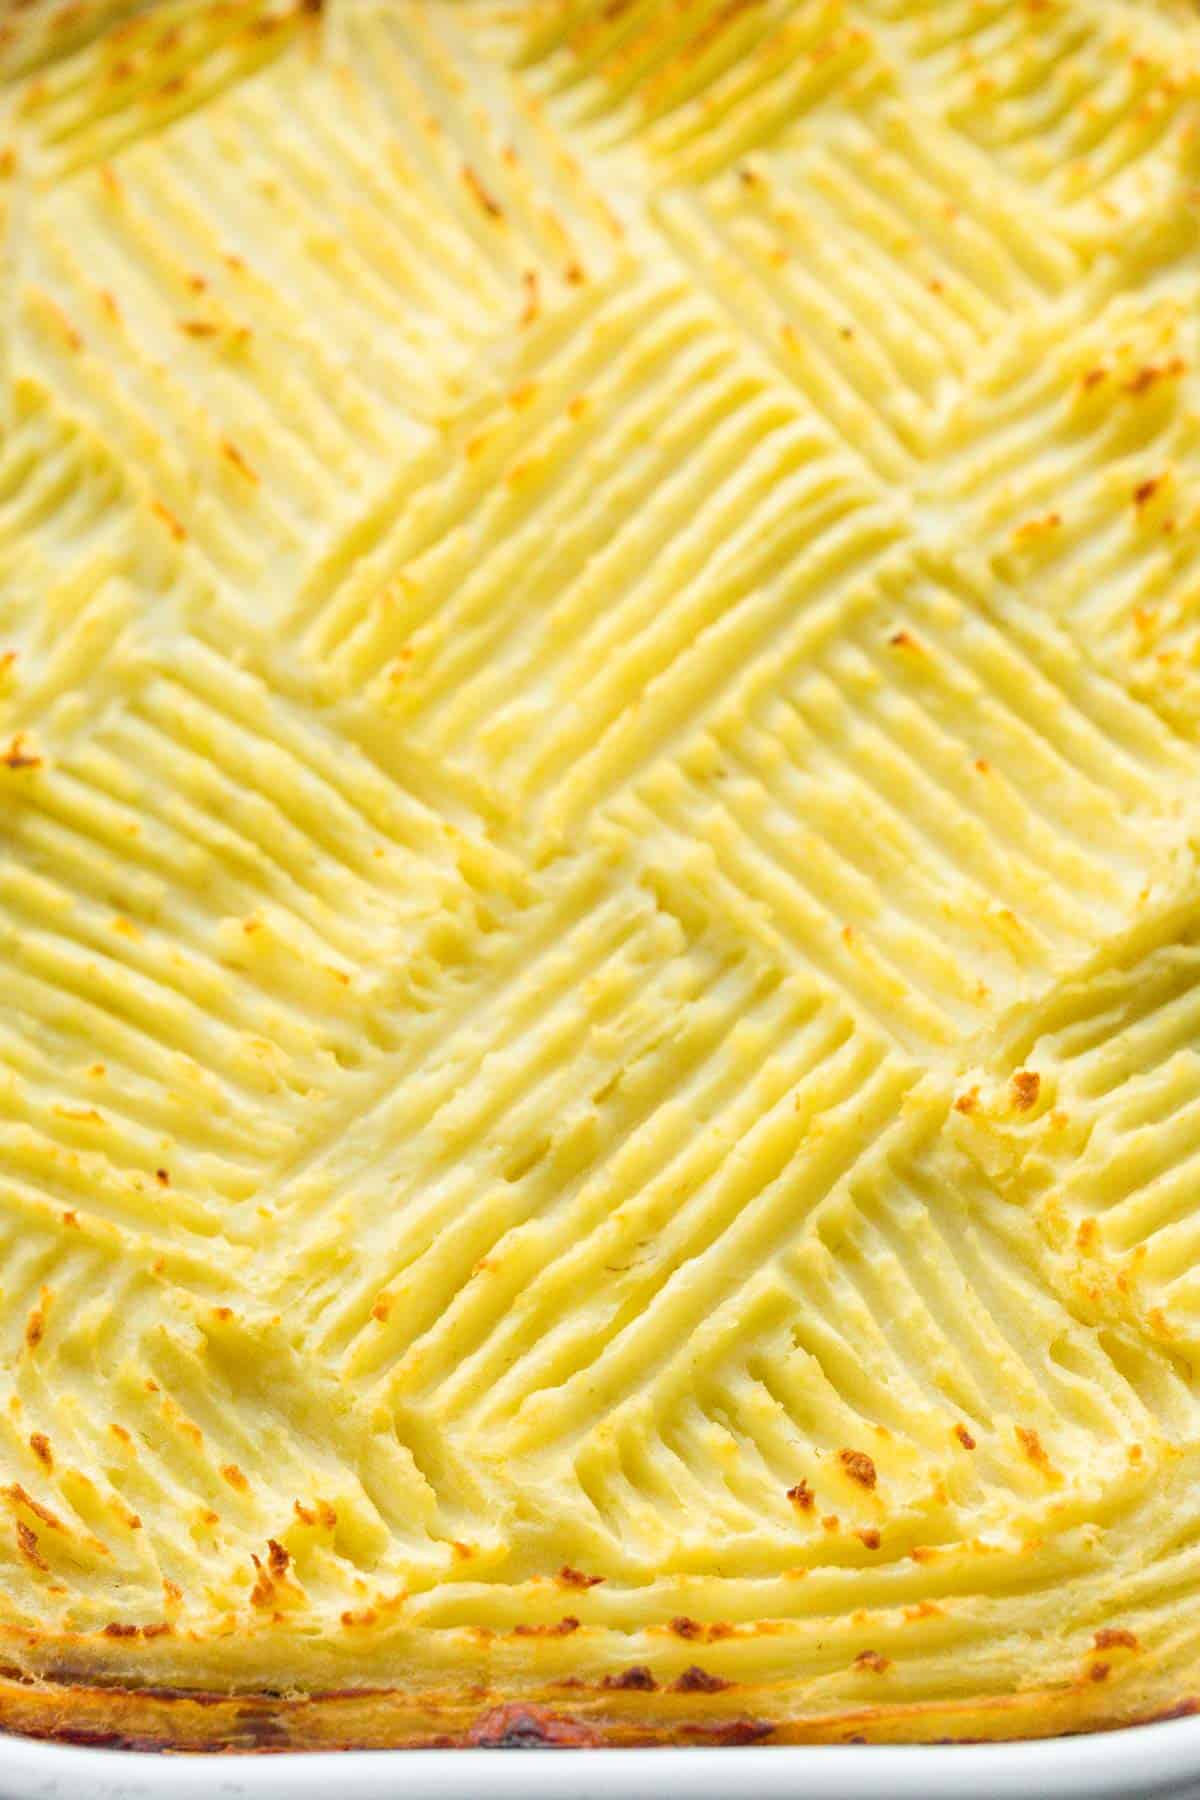 The pattern created on the mashed potatoes top